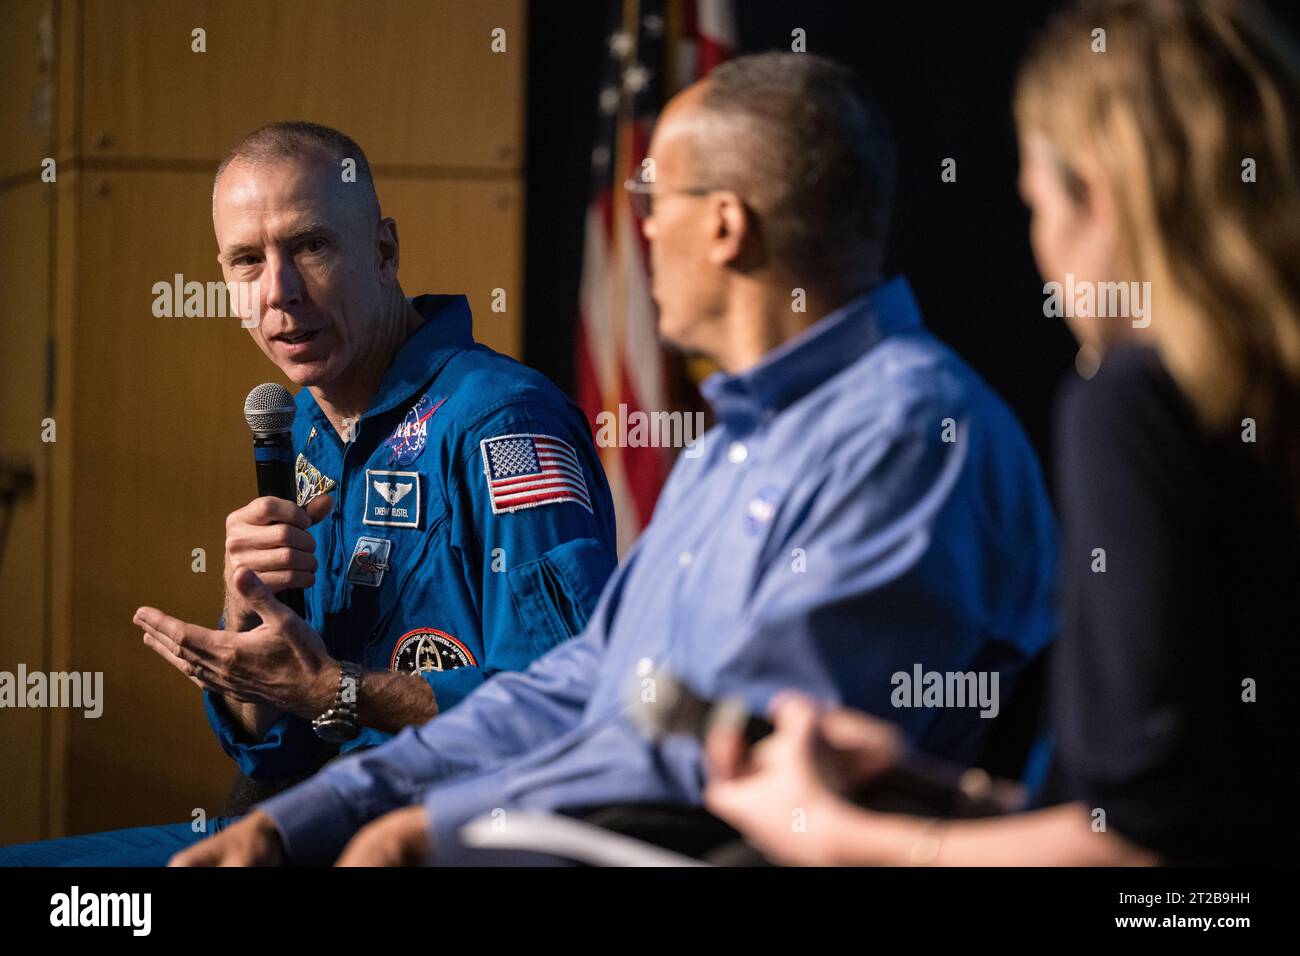 Earth Information Center Student Engagement Event. Former astronaut Drew Feustel answers a question from Earth Information Center Lead for NASA, Eleanor Stokes who moderated a question and answer session with him and former astronaut Alvin Drew during the Earth Information Center Student Engagement event at the Mary W. Jackson NASA Headquarters building, Friday, Sept. 29, 2023, in Washington. Stock Photo